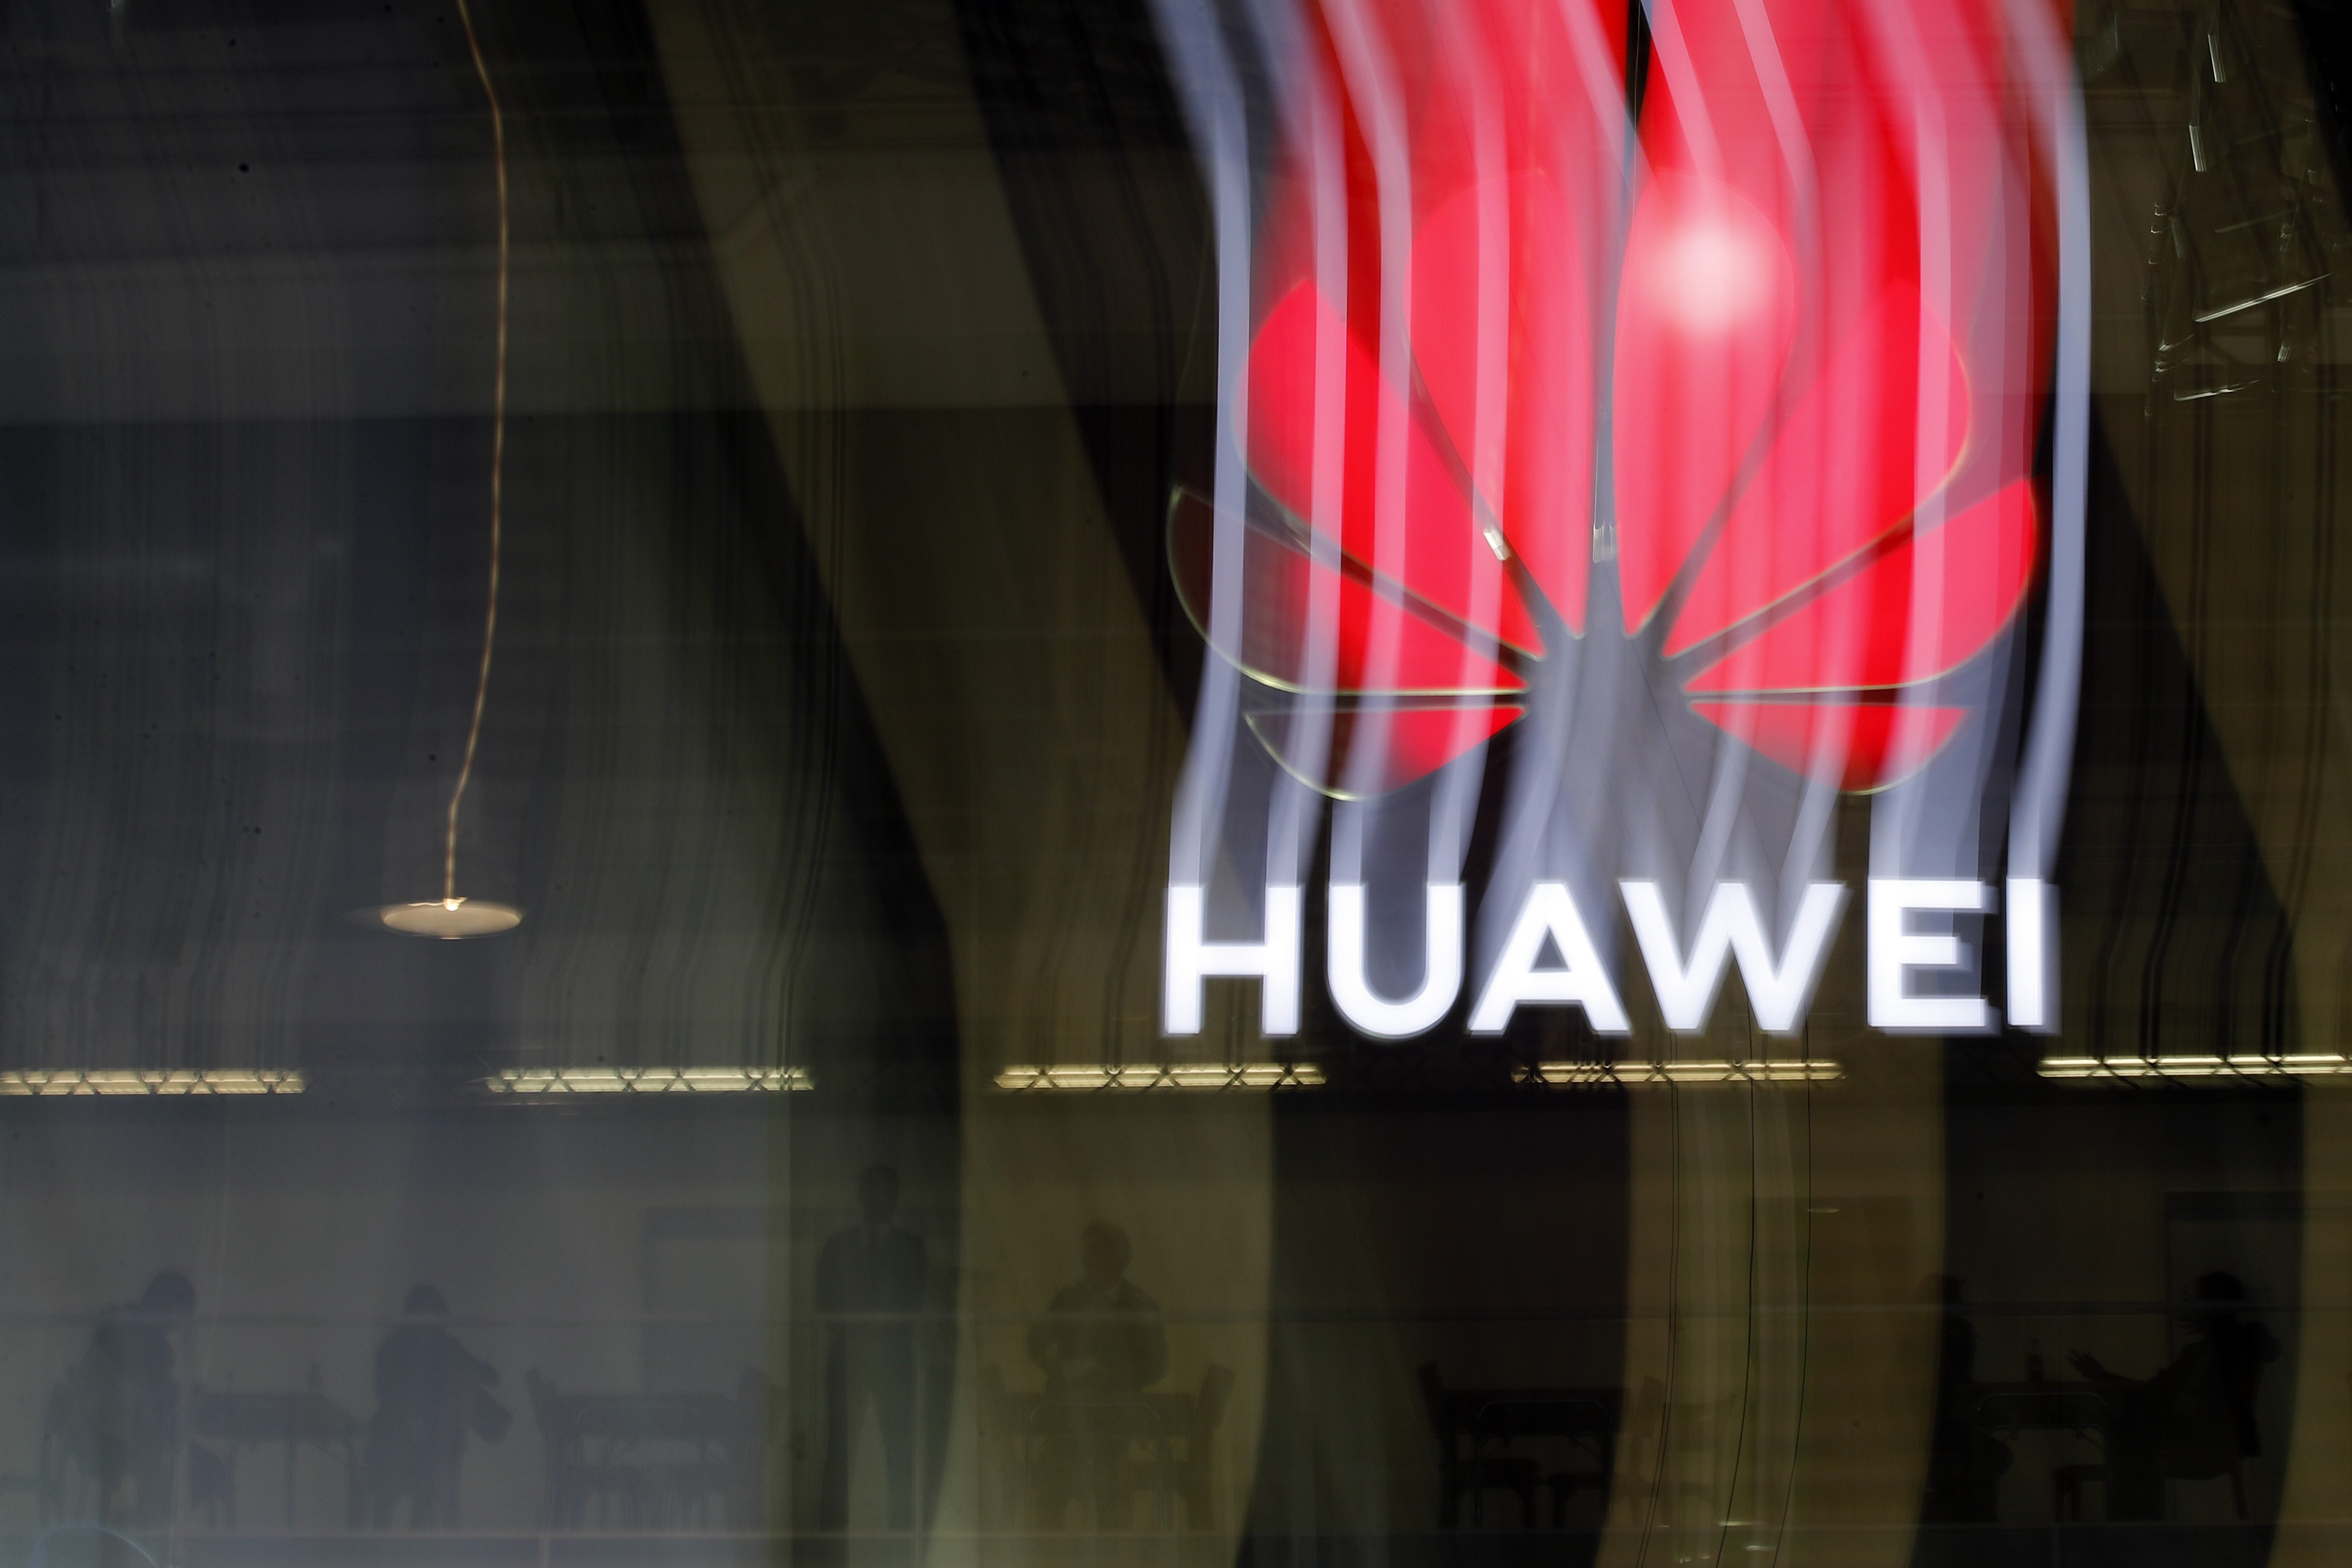 Huawei’s intention to raise funds comes as the Shenzhen-based company comes under increased scrutiny from the US and countries in Europe over security concerns related to its telecommunications equipment. AFP